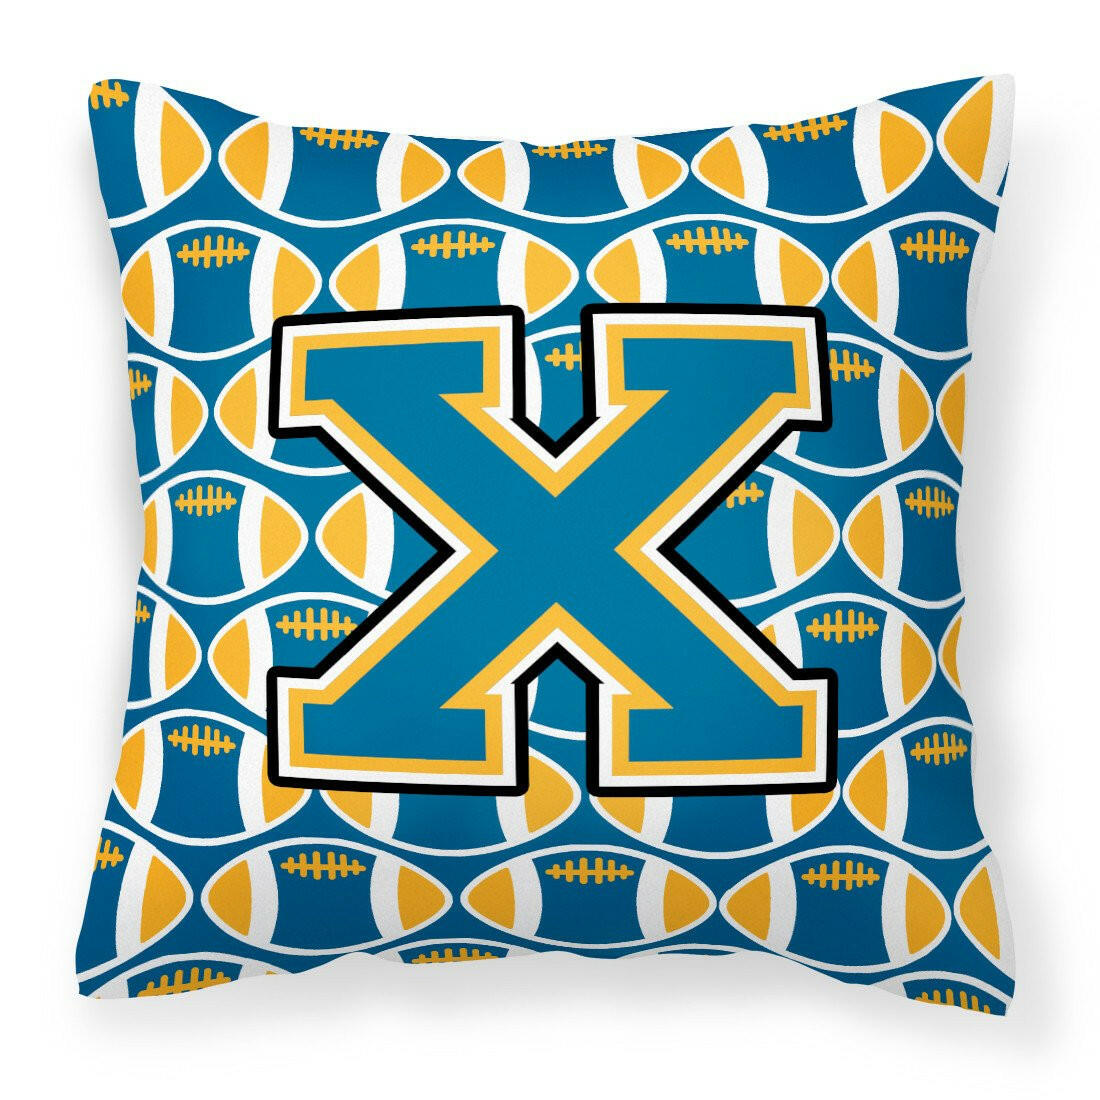 Letter X Football Blue and Gold Fabric Decorative Pillow CJ1077-XPW1414 by Caroline's Treasures